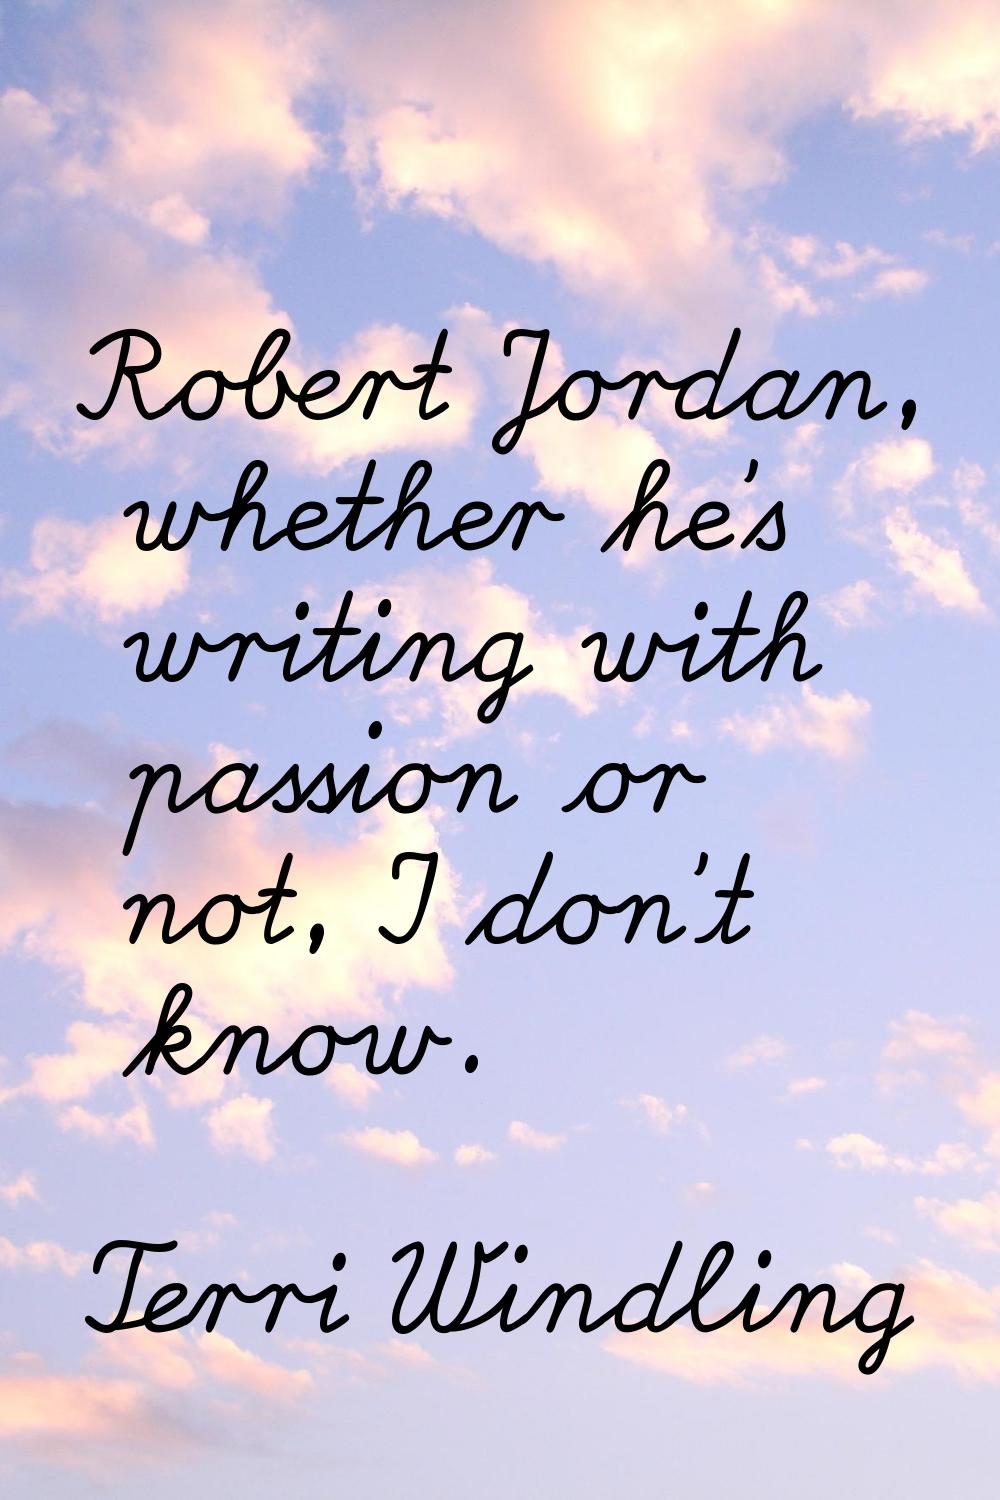 Robert Jordan, whether he's writing with passion or not, I don't know.